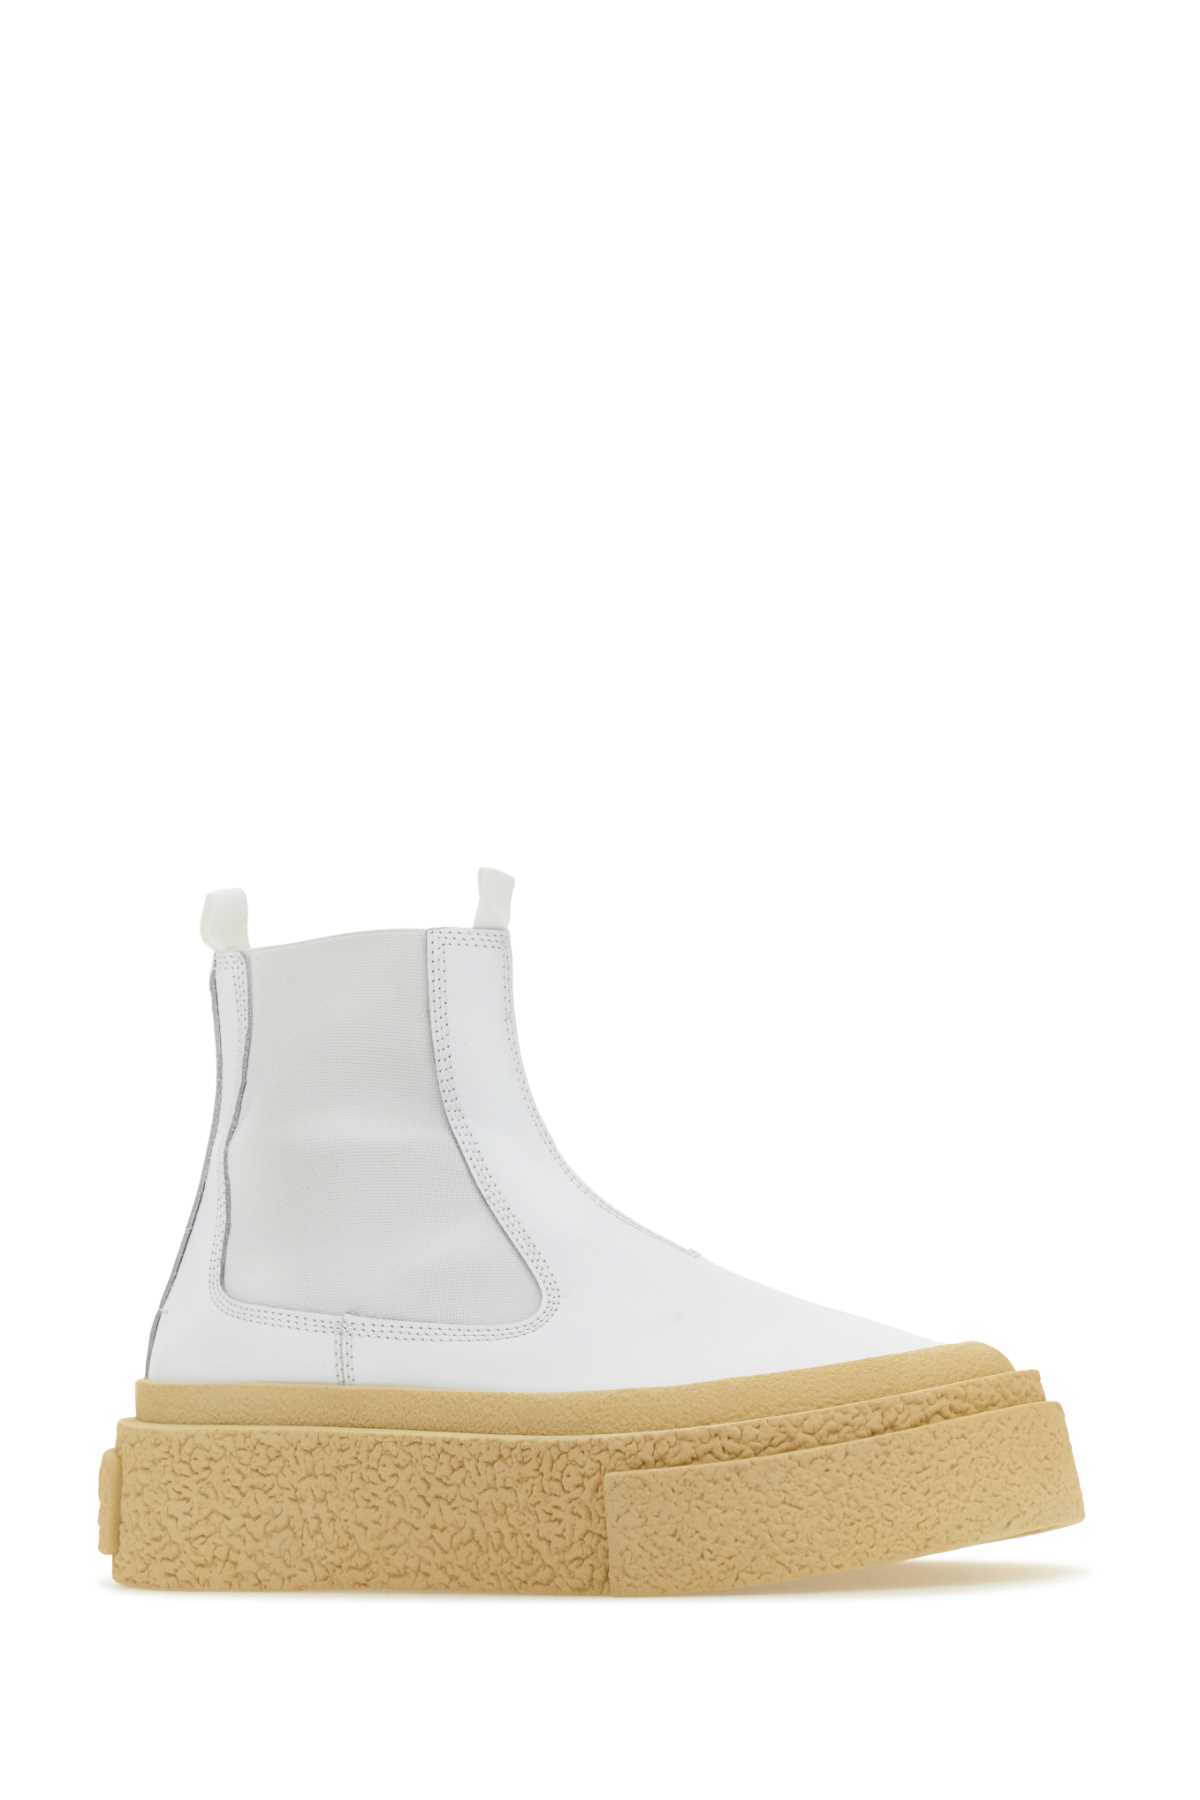 Mm6 Maison Margiela White Leather Ankle Boots In Brightwhite